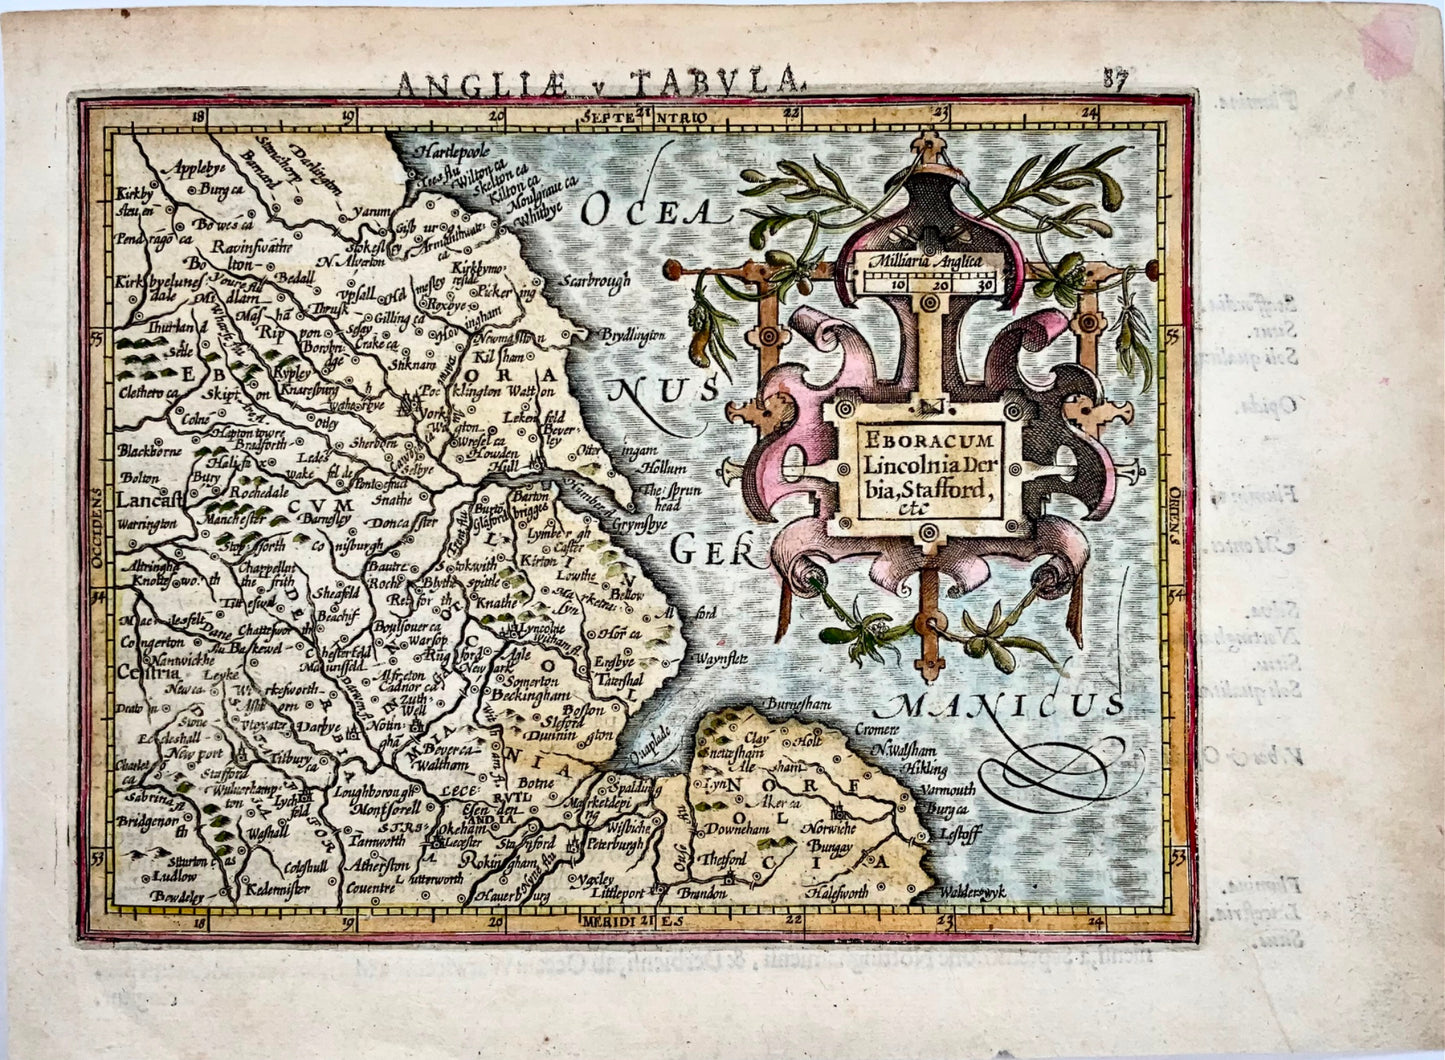 1610 Norfolk, Lincolnshire, Cambridgeshire. Hand coloured map by Hondius